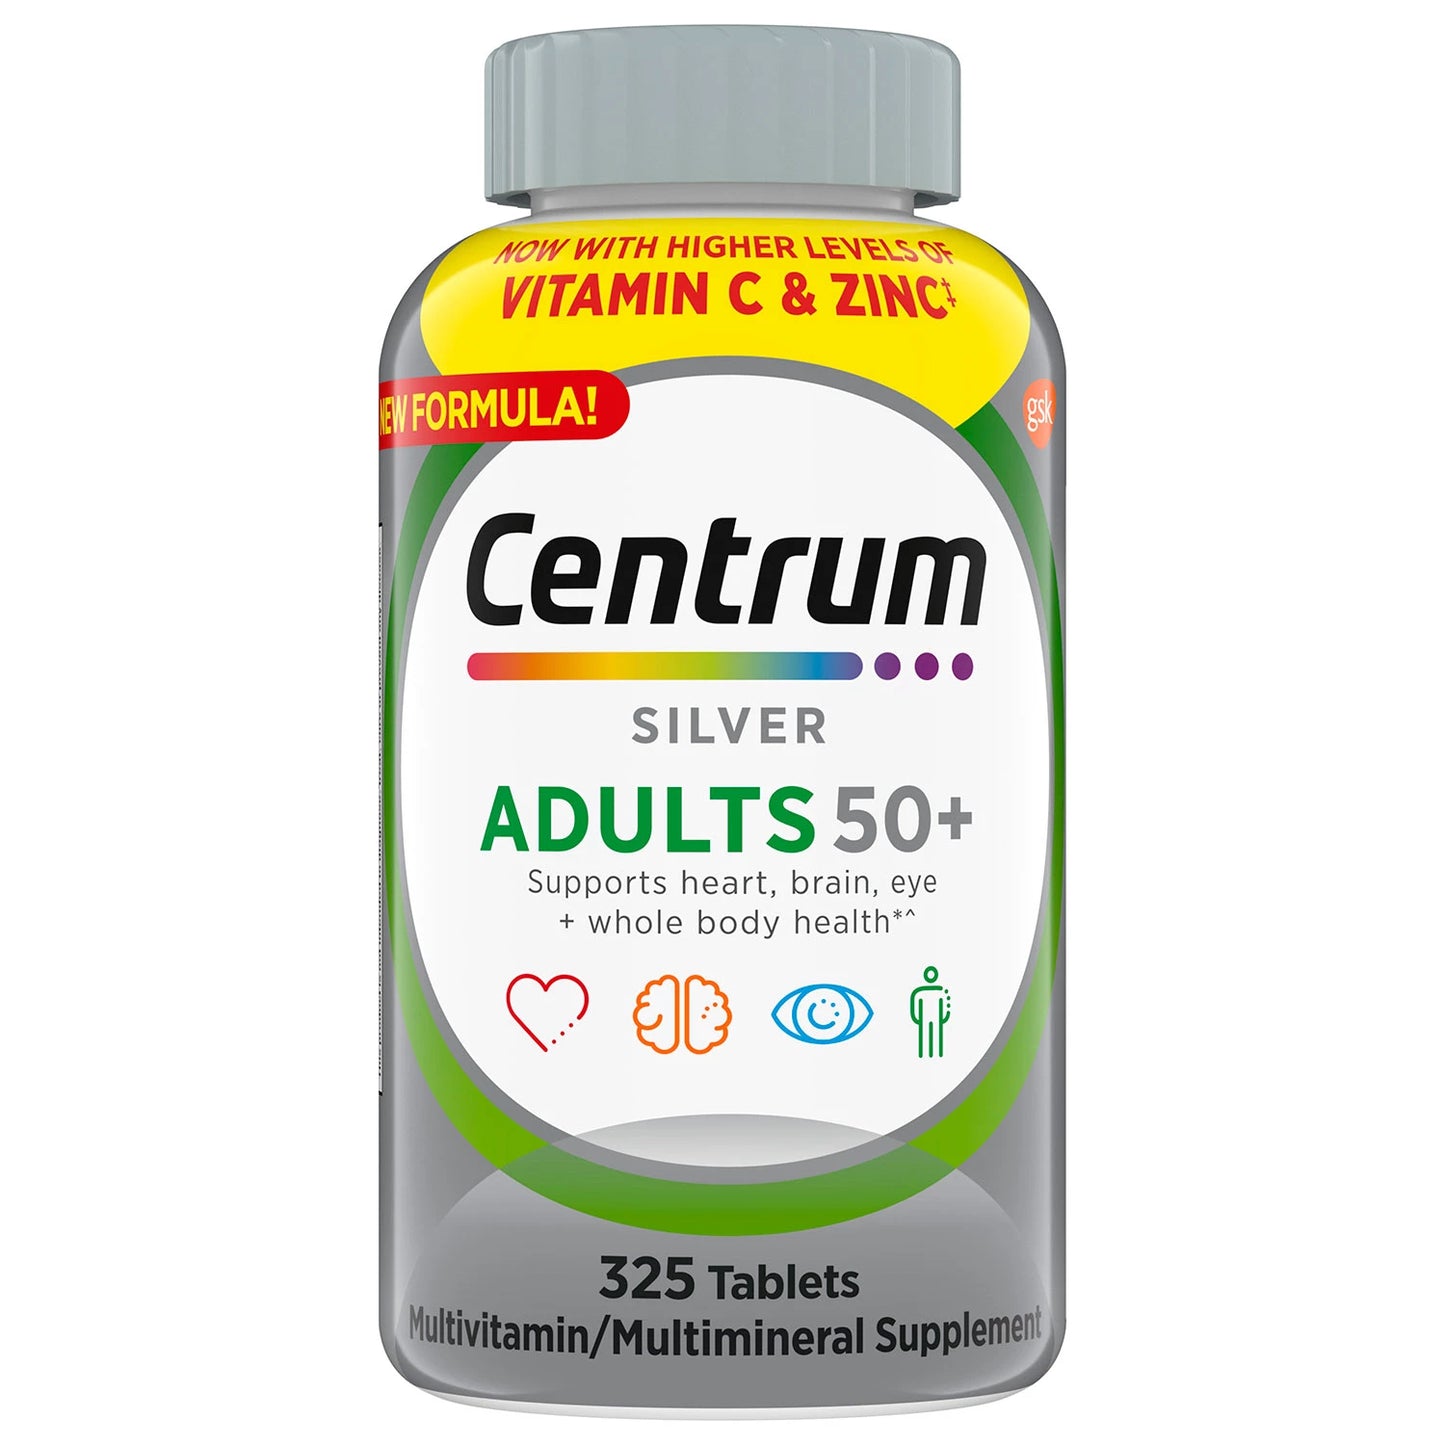 Centrum Silver Multivitamin for Adults 50+, Multimineral Supplement (325 ct.)